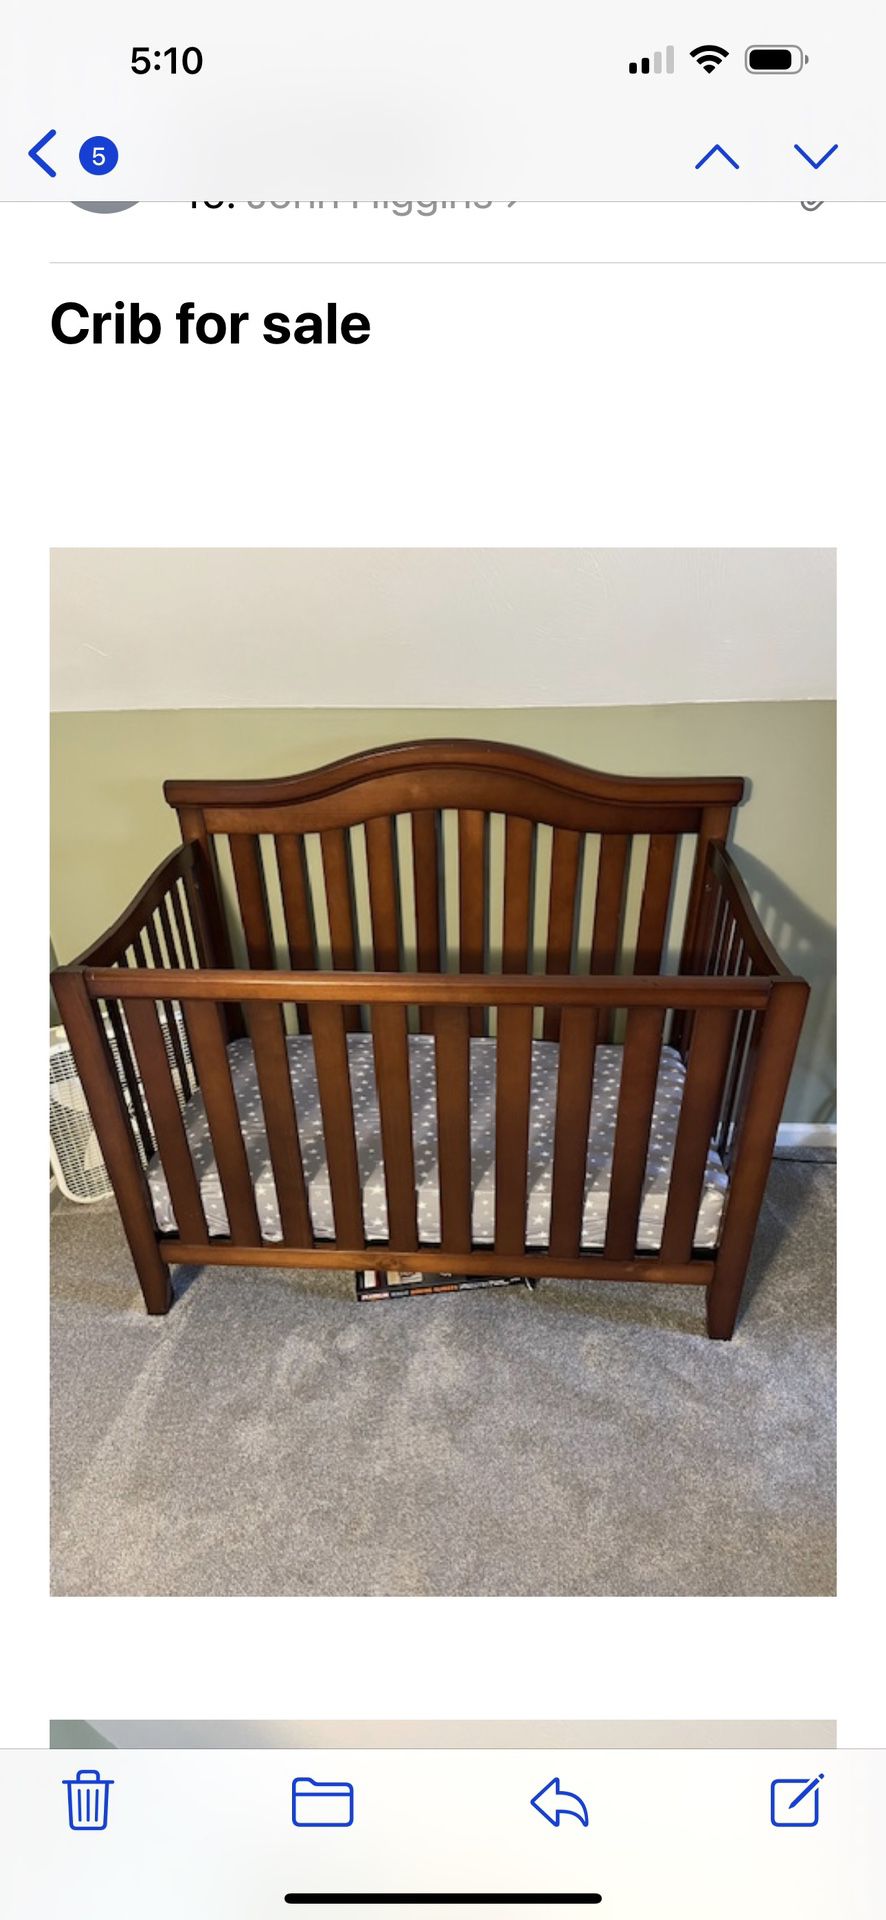 Crib With Almost New Covered Premium Mattress 